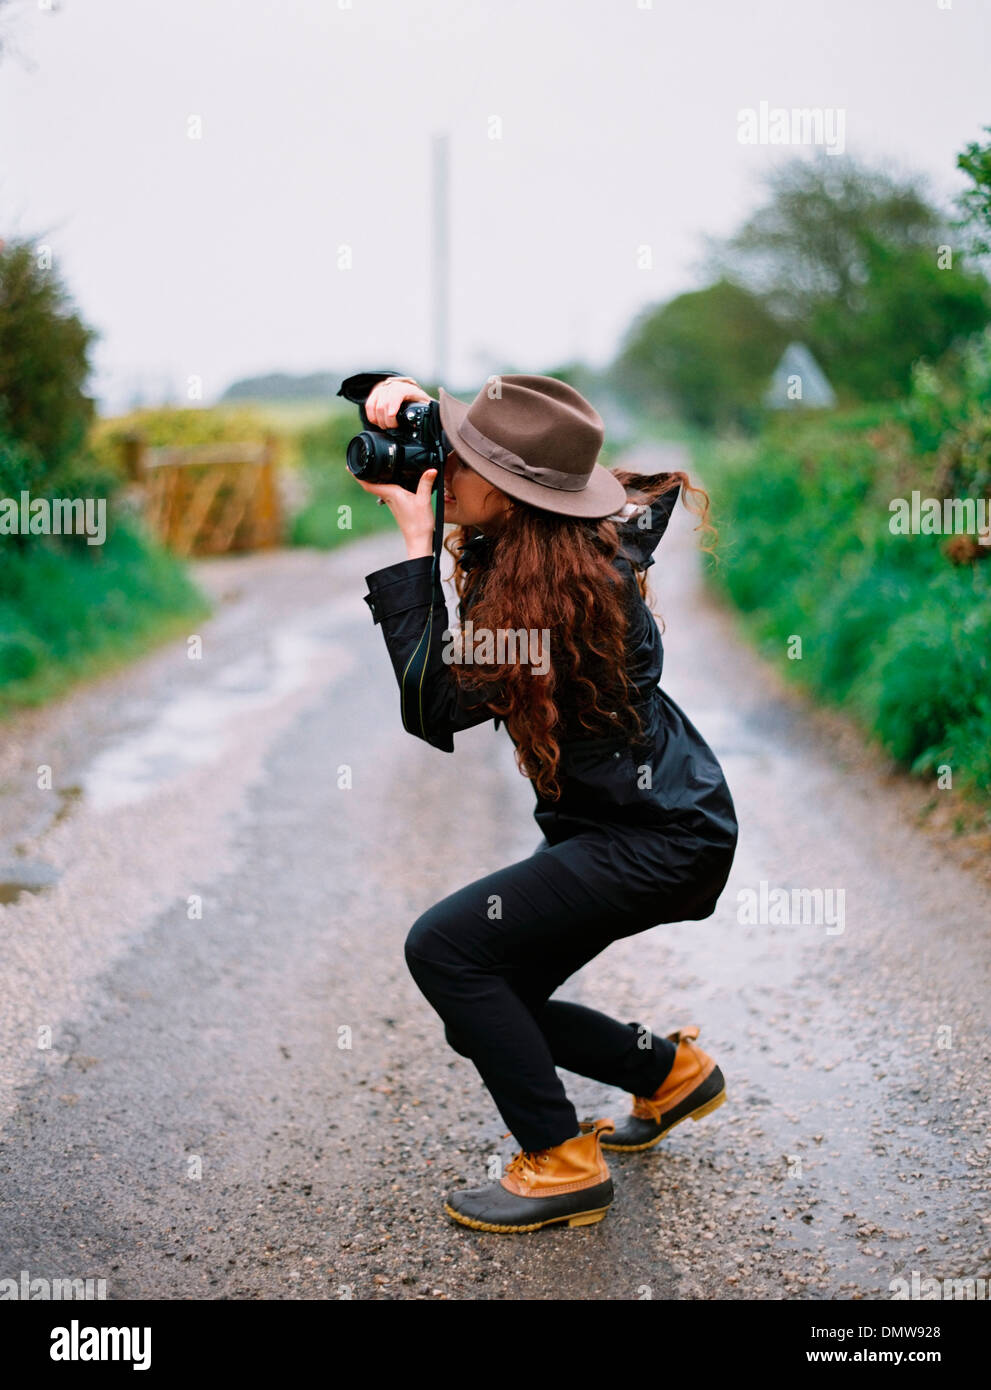 A woman crouching to take a photograph on a country road. Stock Photo